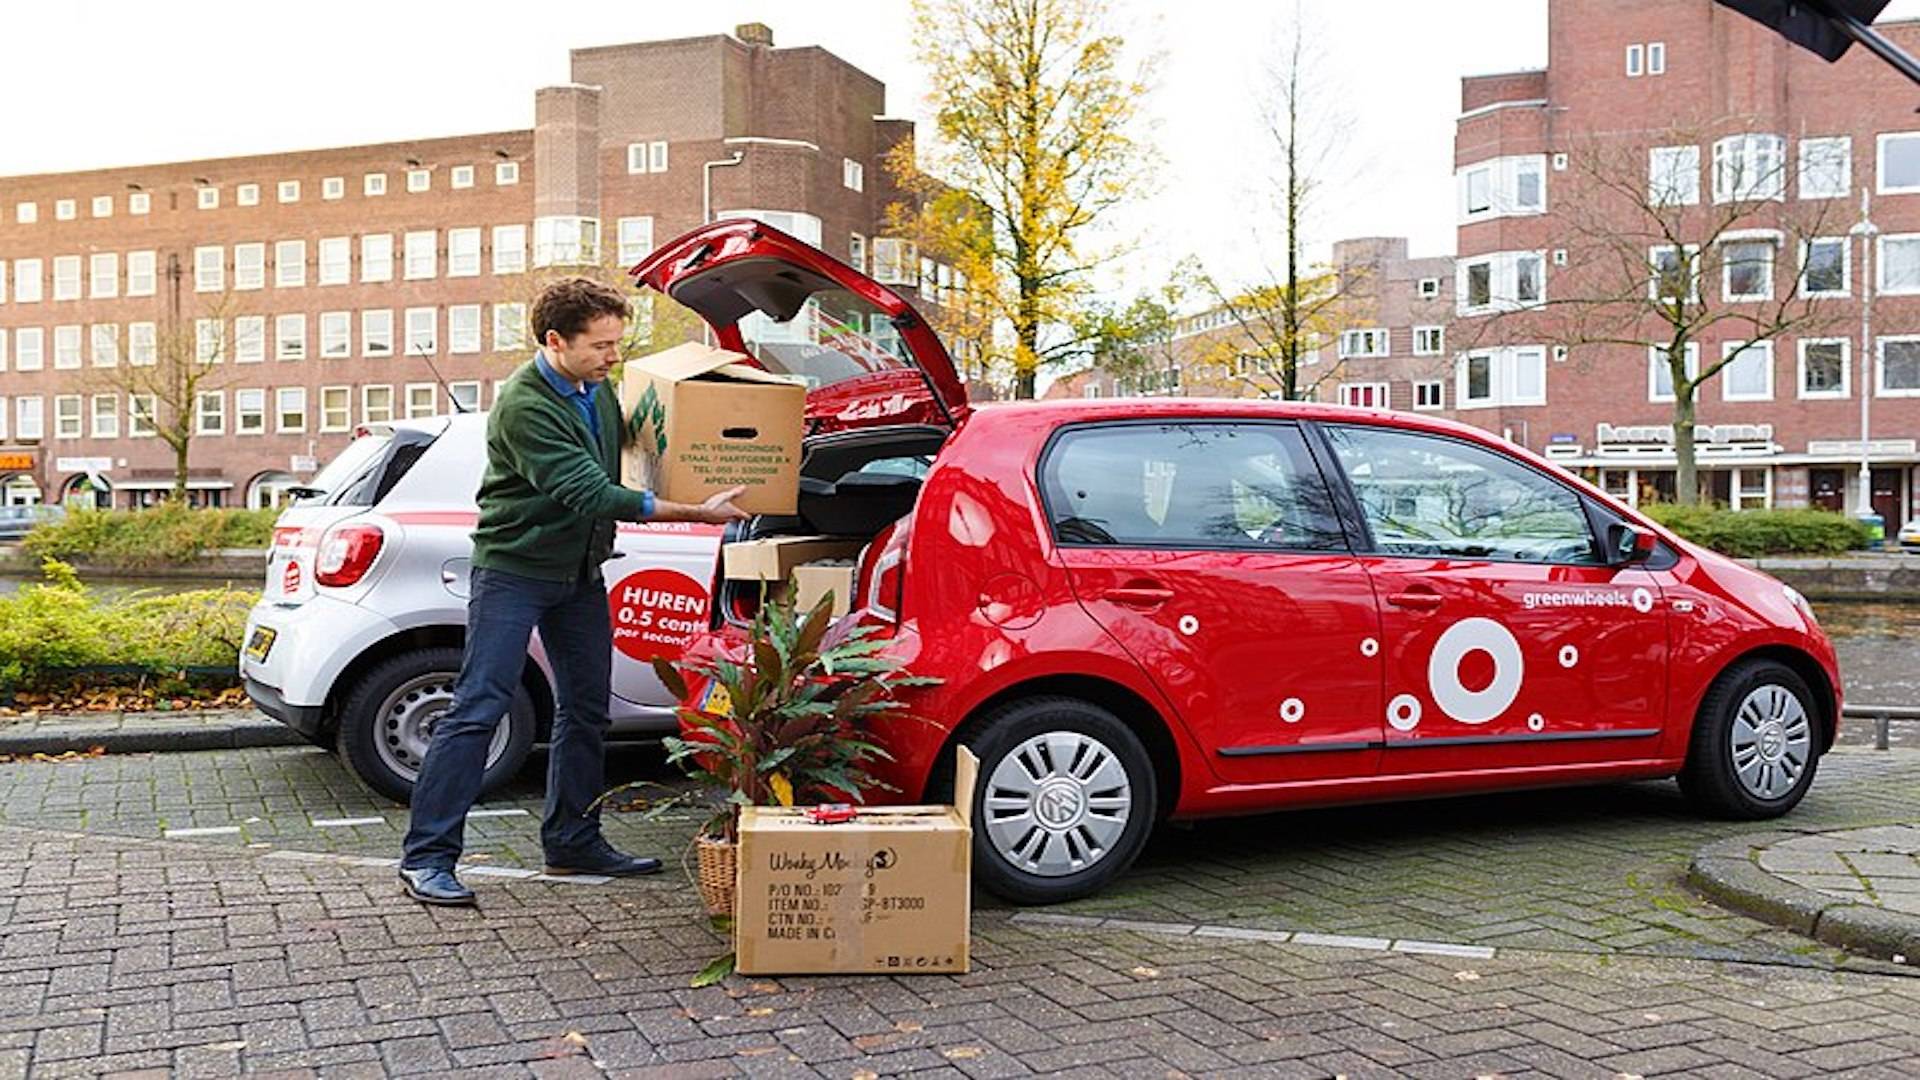 The Sharing Economy's Circular Business Opportunities